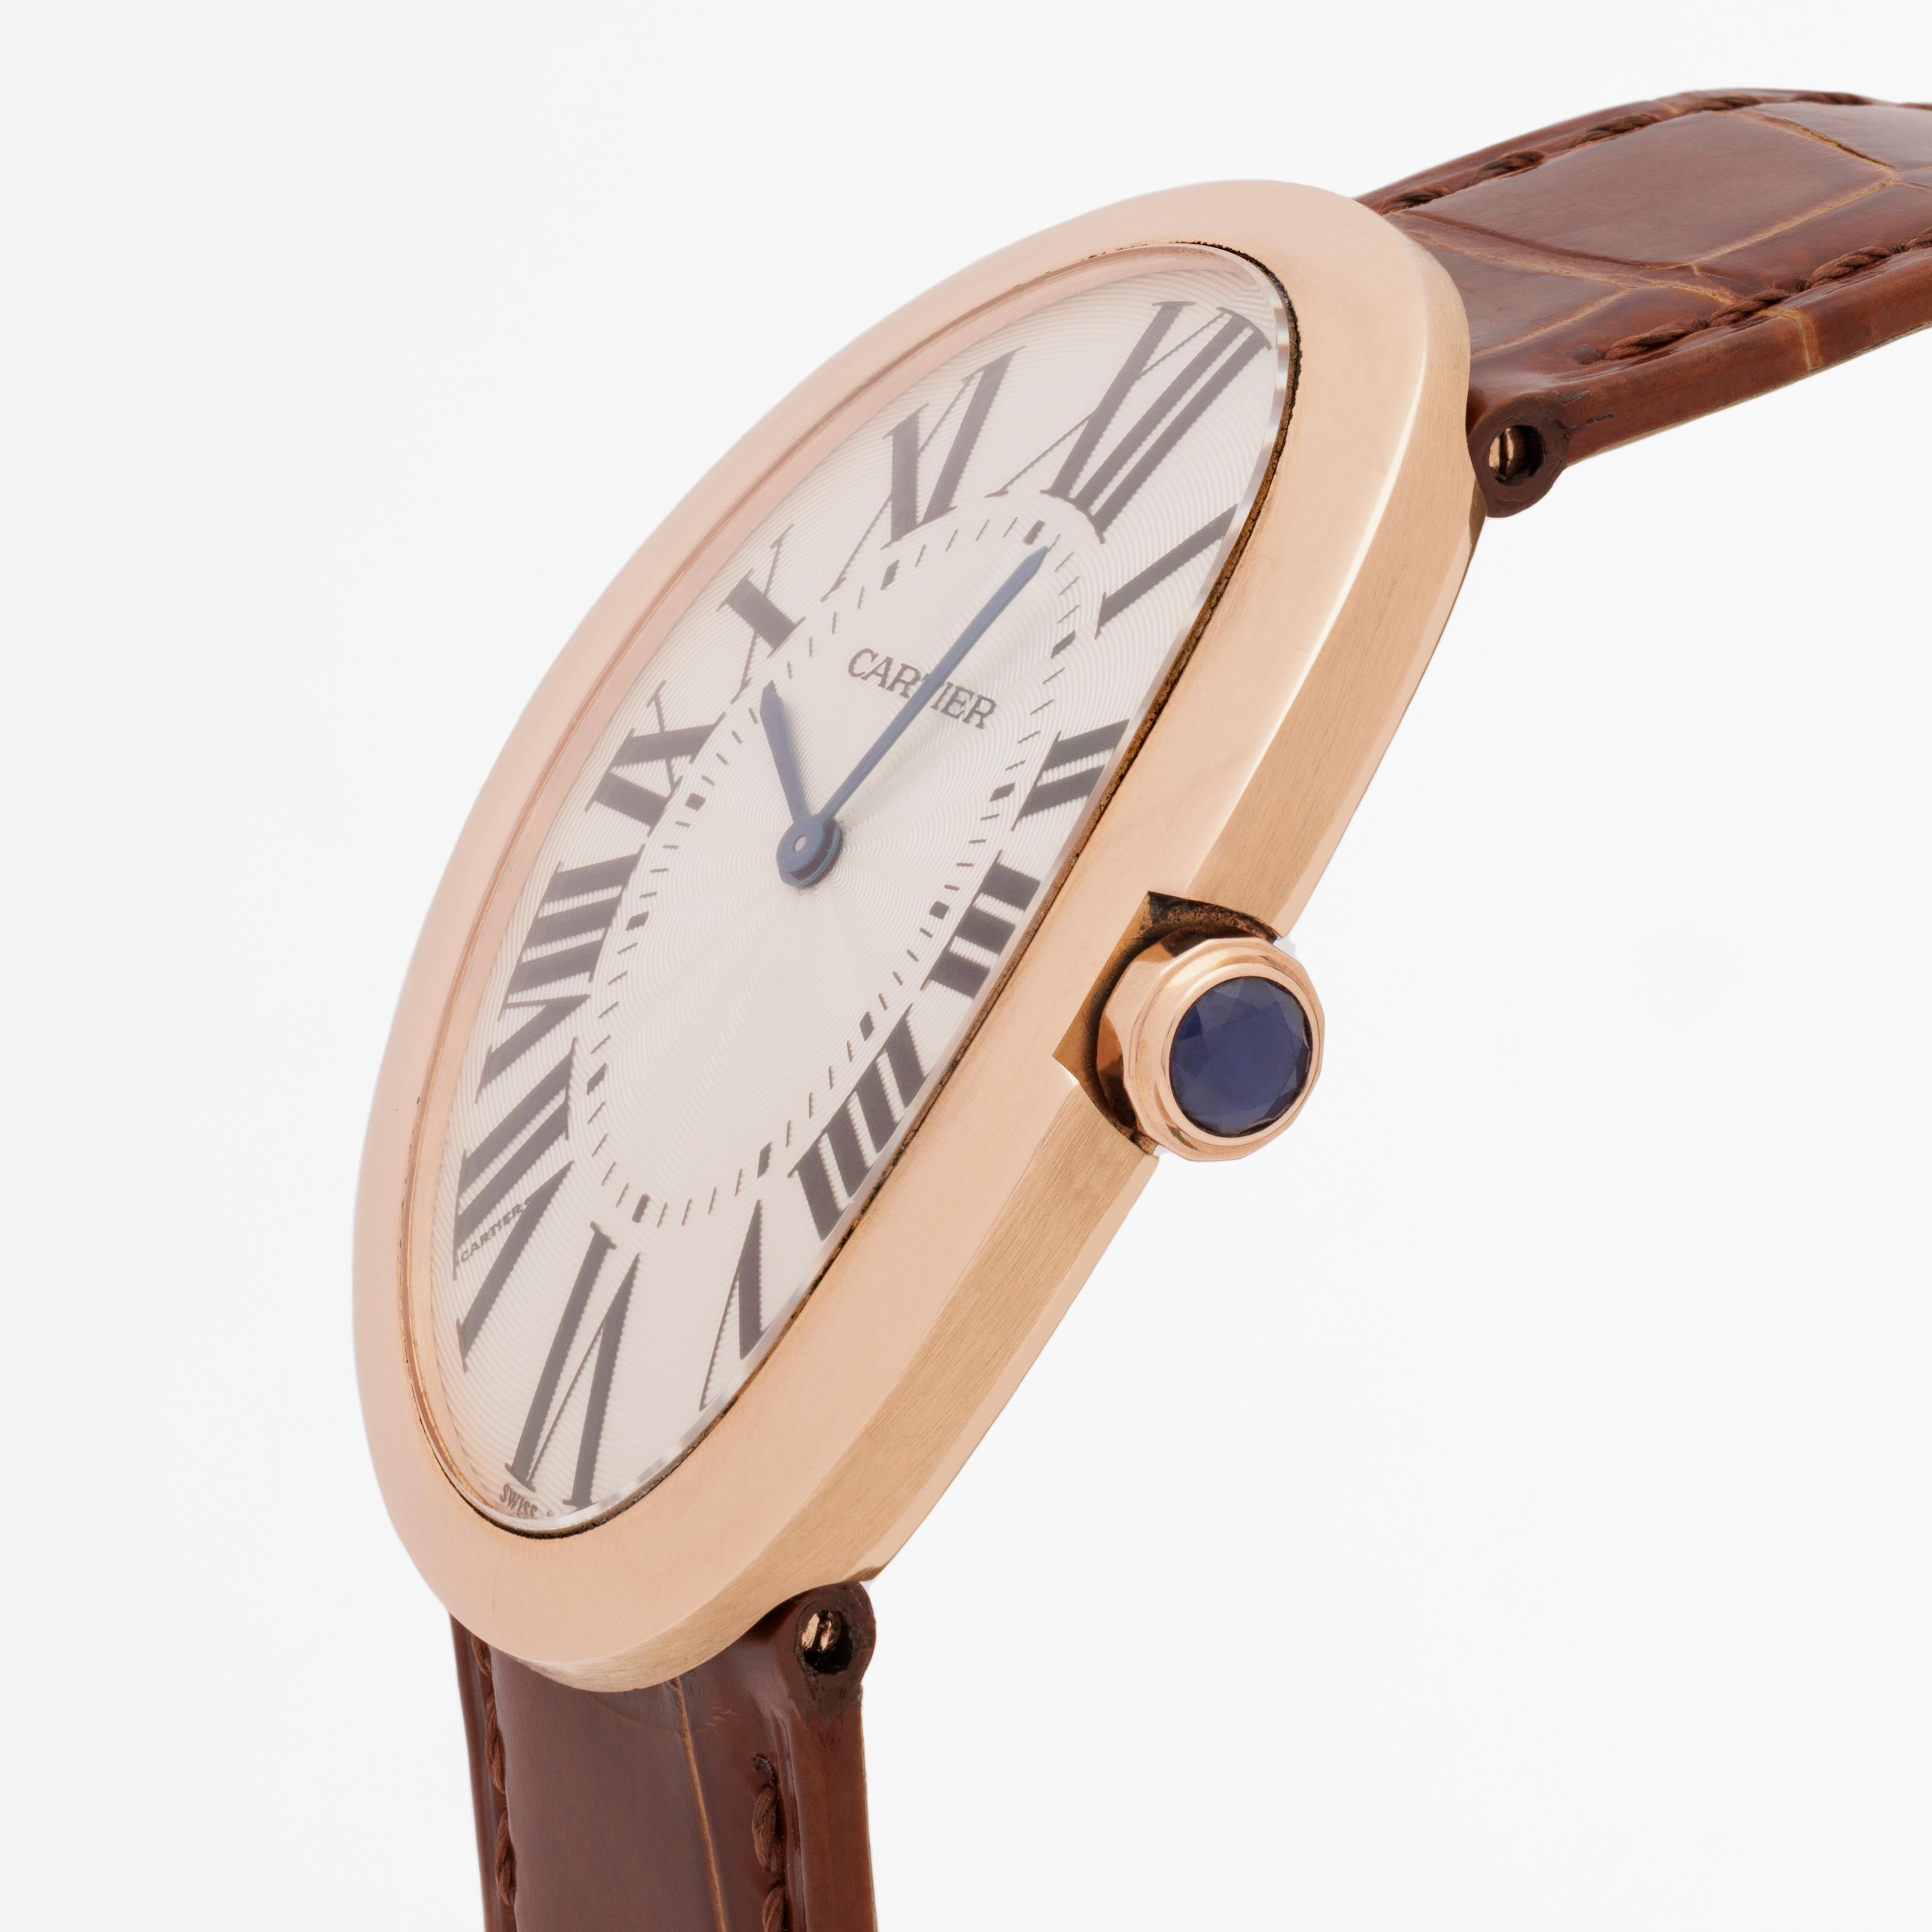 Cartier Baignoire 18 Karat Rose Gold Extra Large Skeletized Back W8000002 In Good Condition For Sale In New York, NY